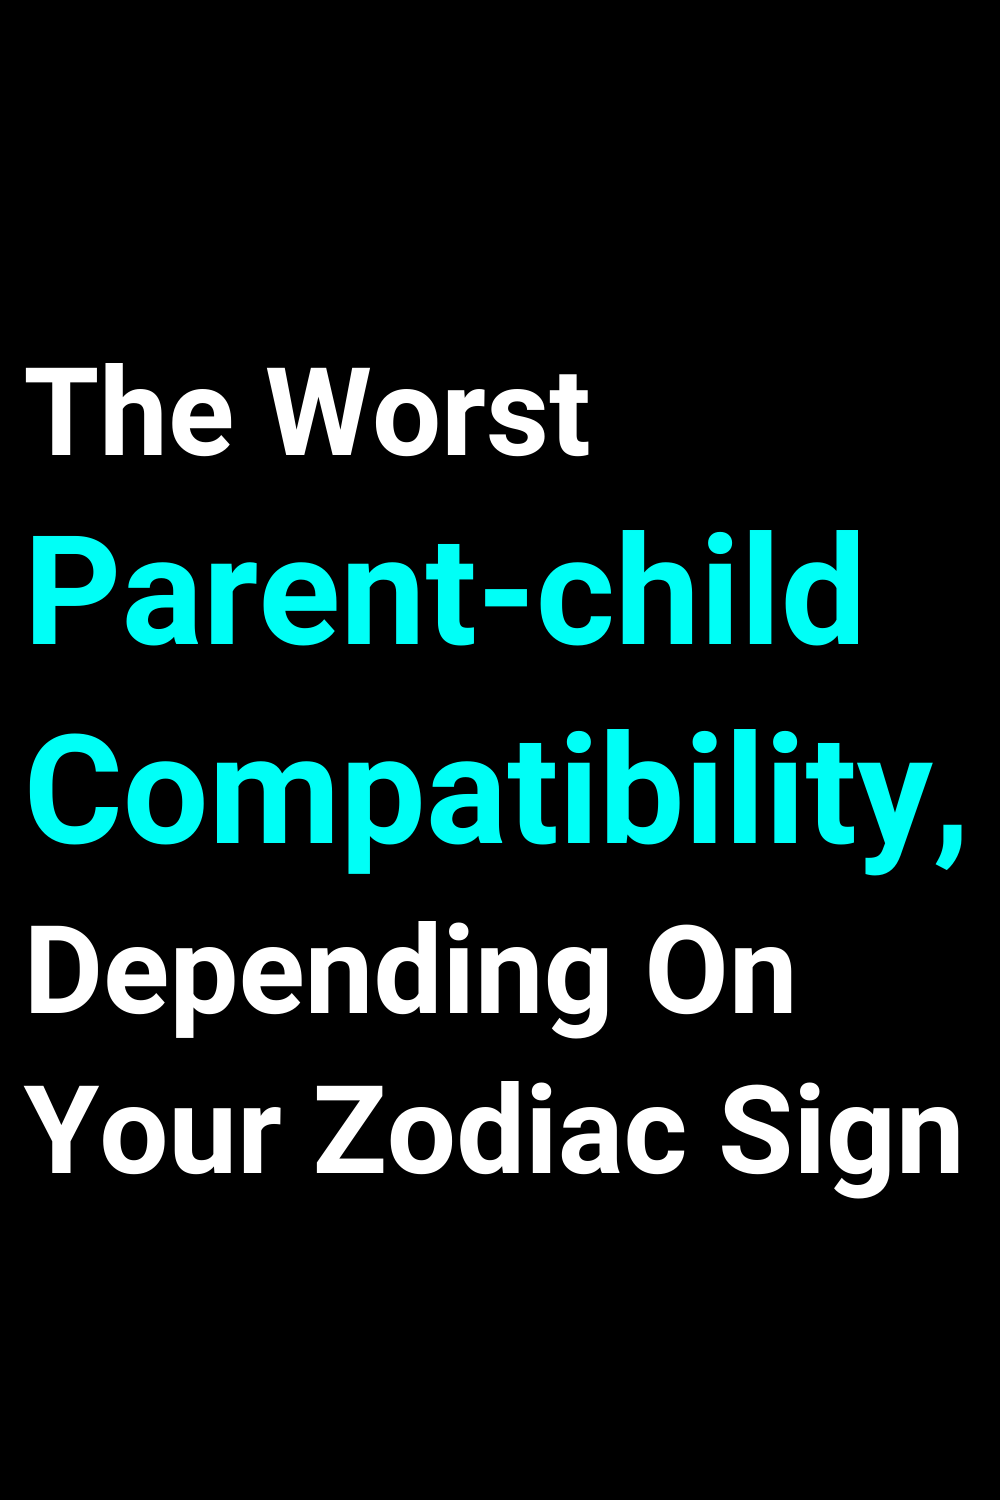 The Worst Parent-child Compatibility, Depending On Your Zodiac Sign